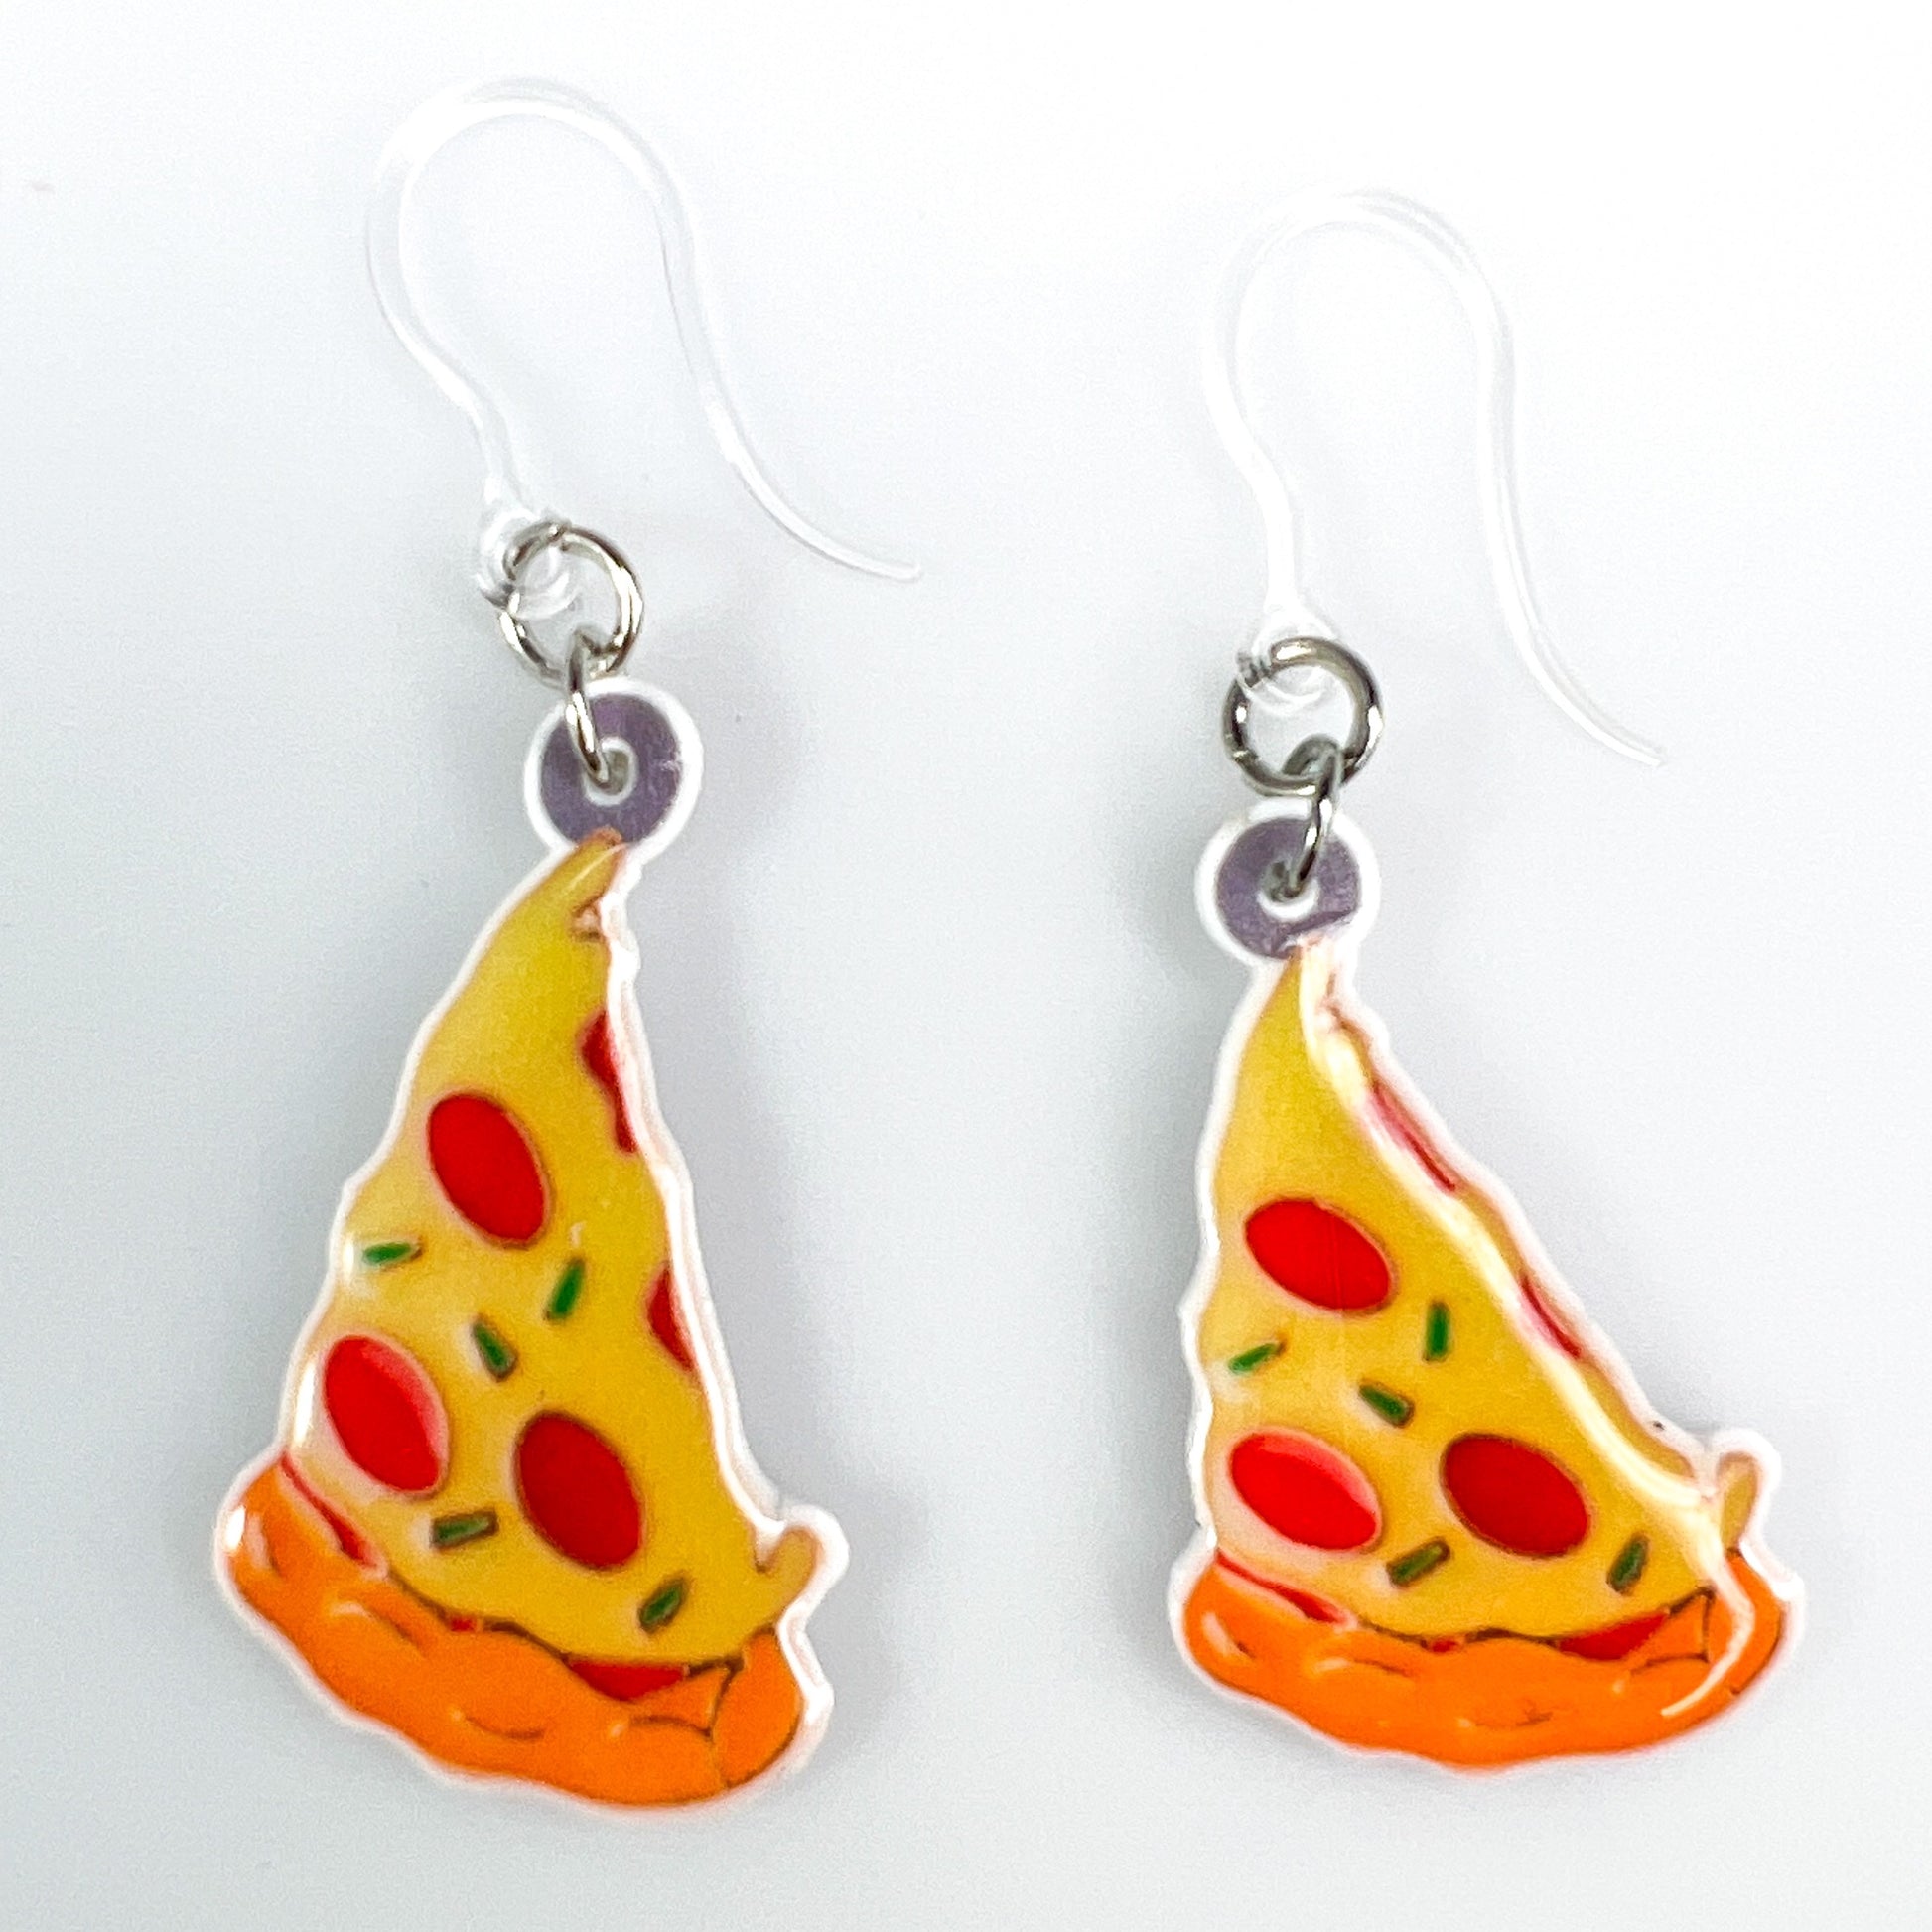 Exaggerated Junk Food Earrings (Dangles) - pizza